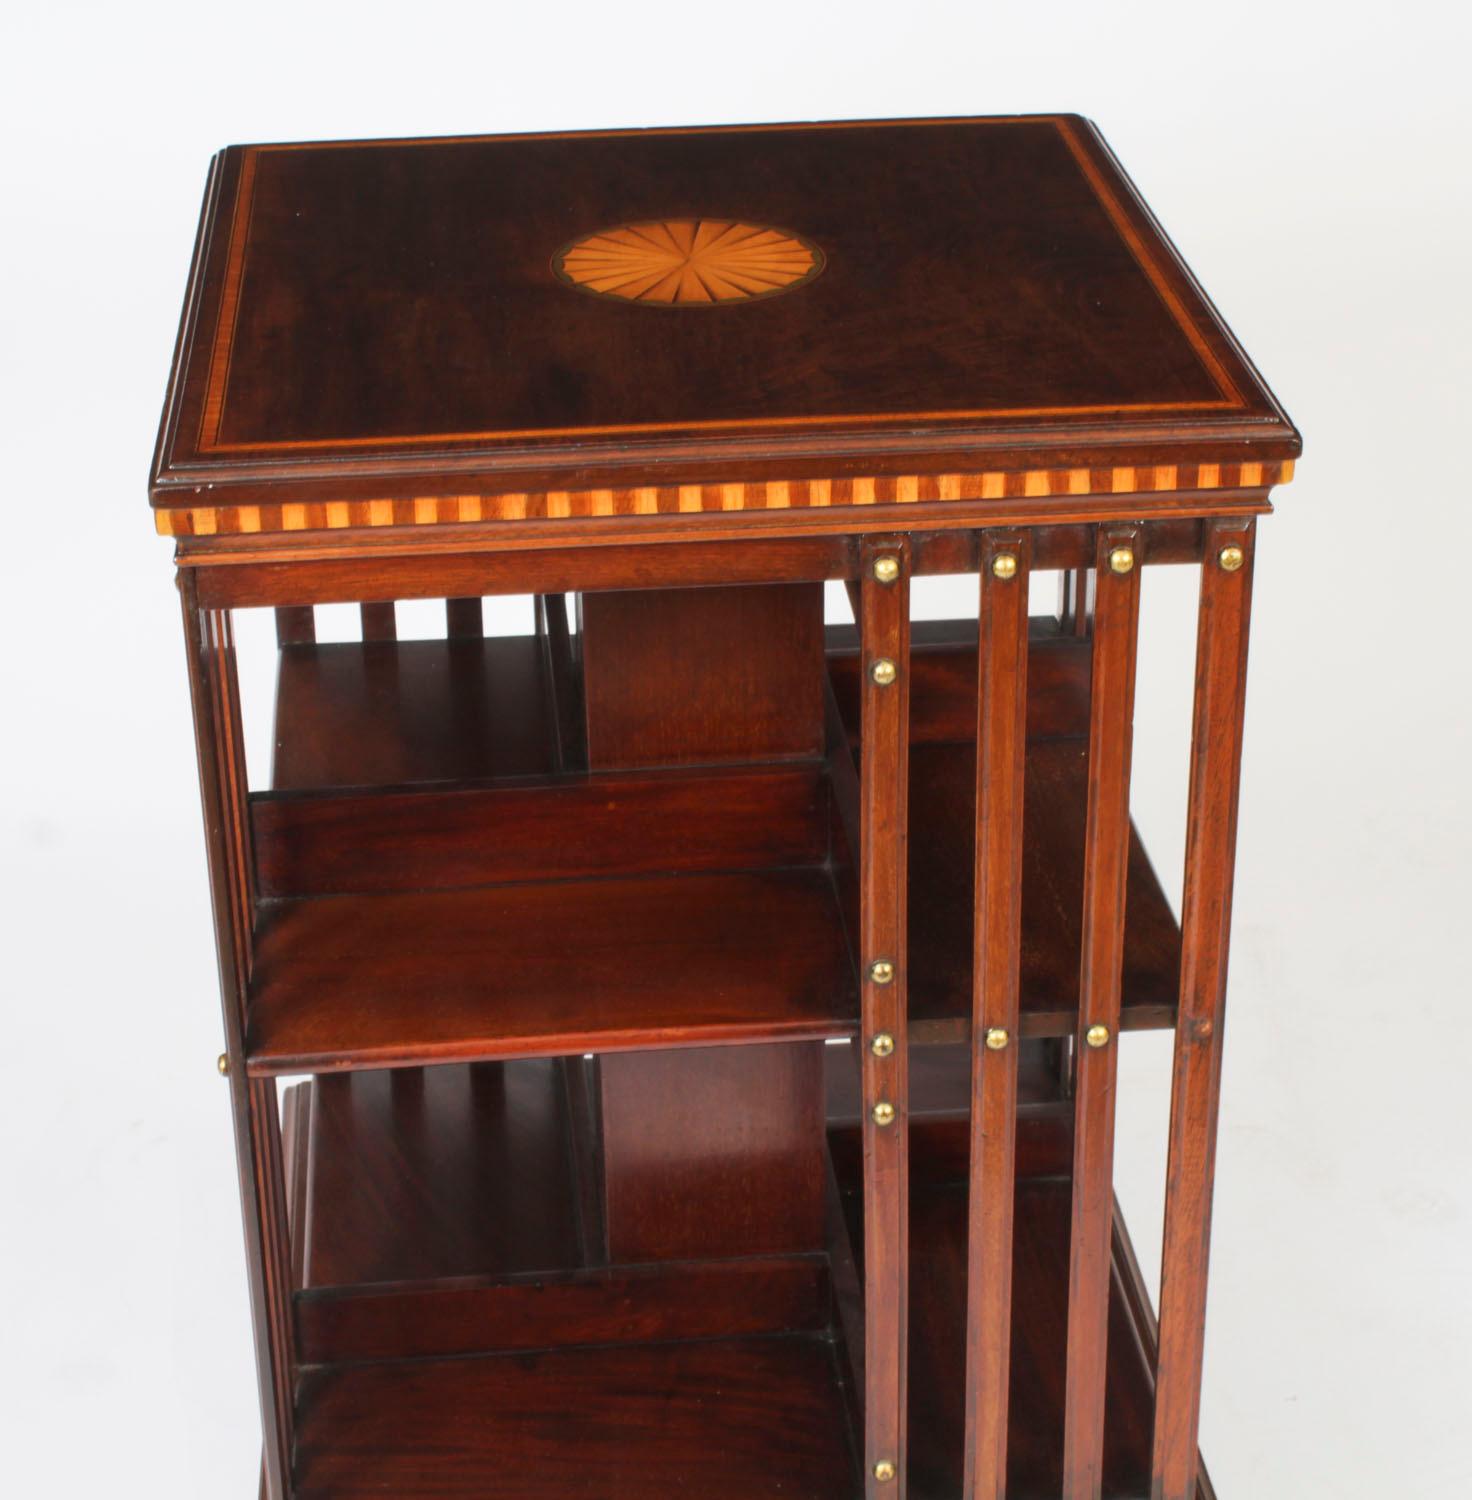 Antique Edwardian Revolving Bookcase Flame Mahogany c.1900 For Sale 1